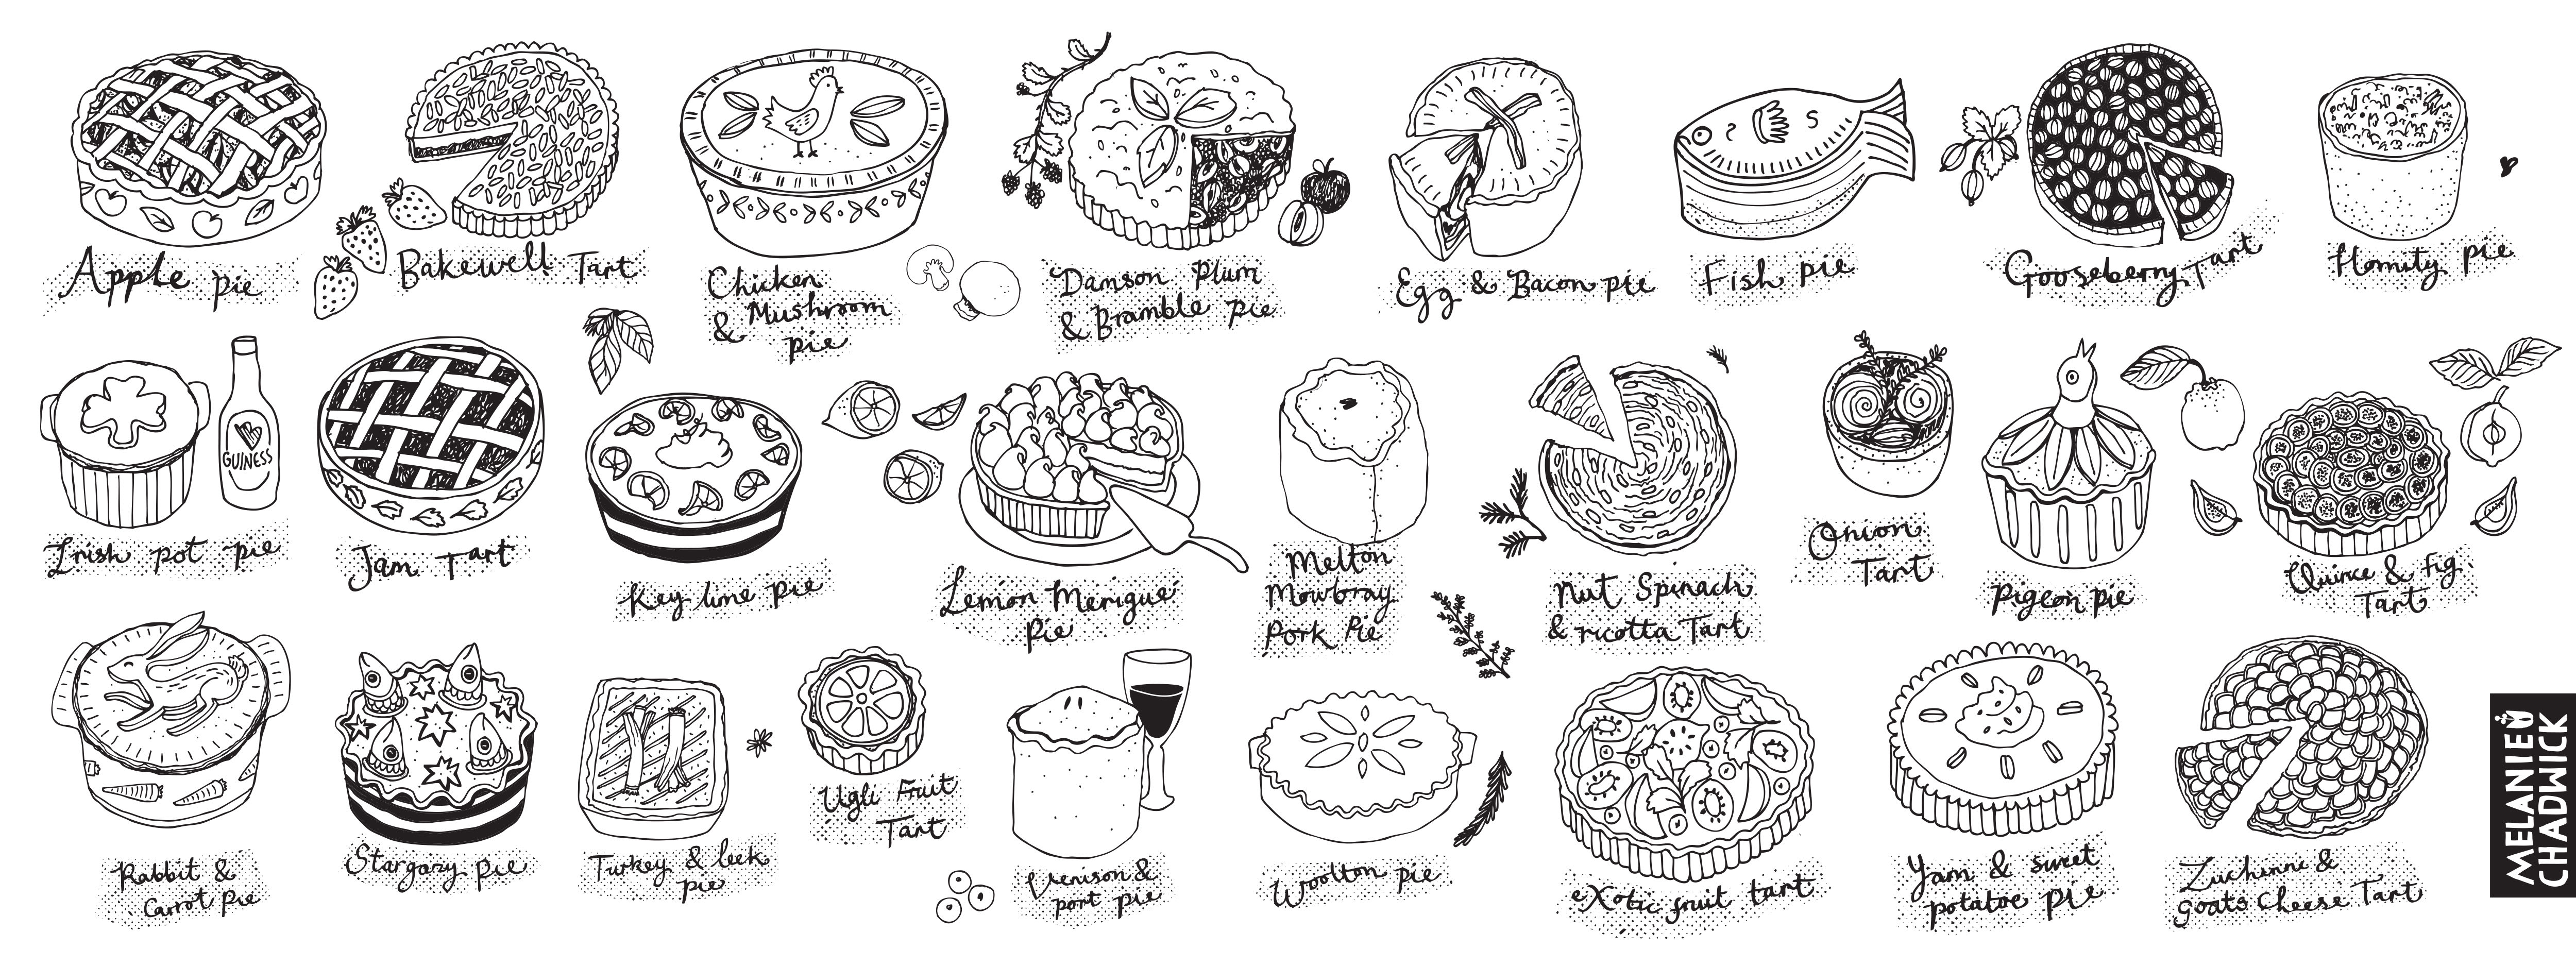 They Draw and Cook Food Illustrations Domestika